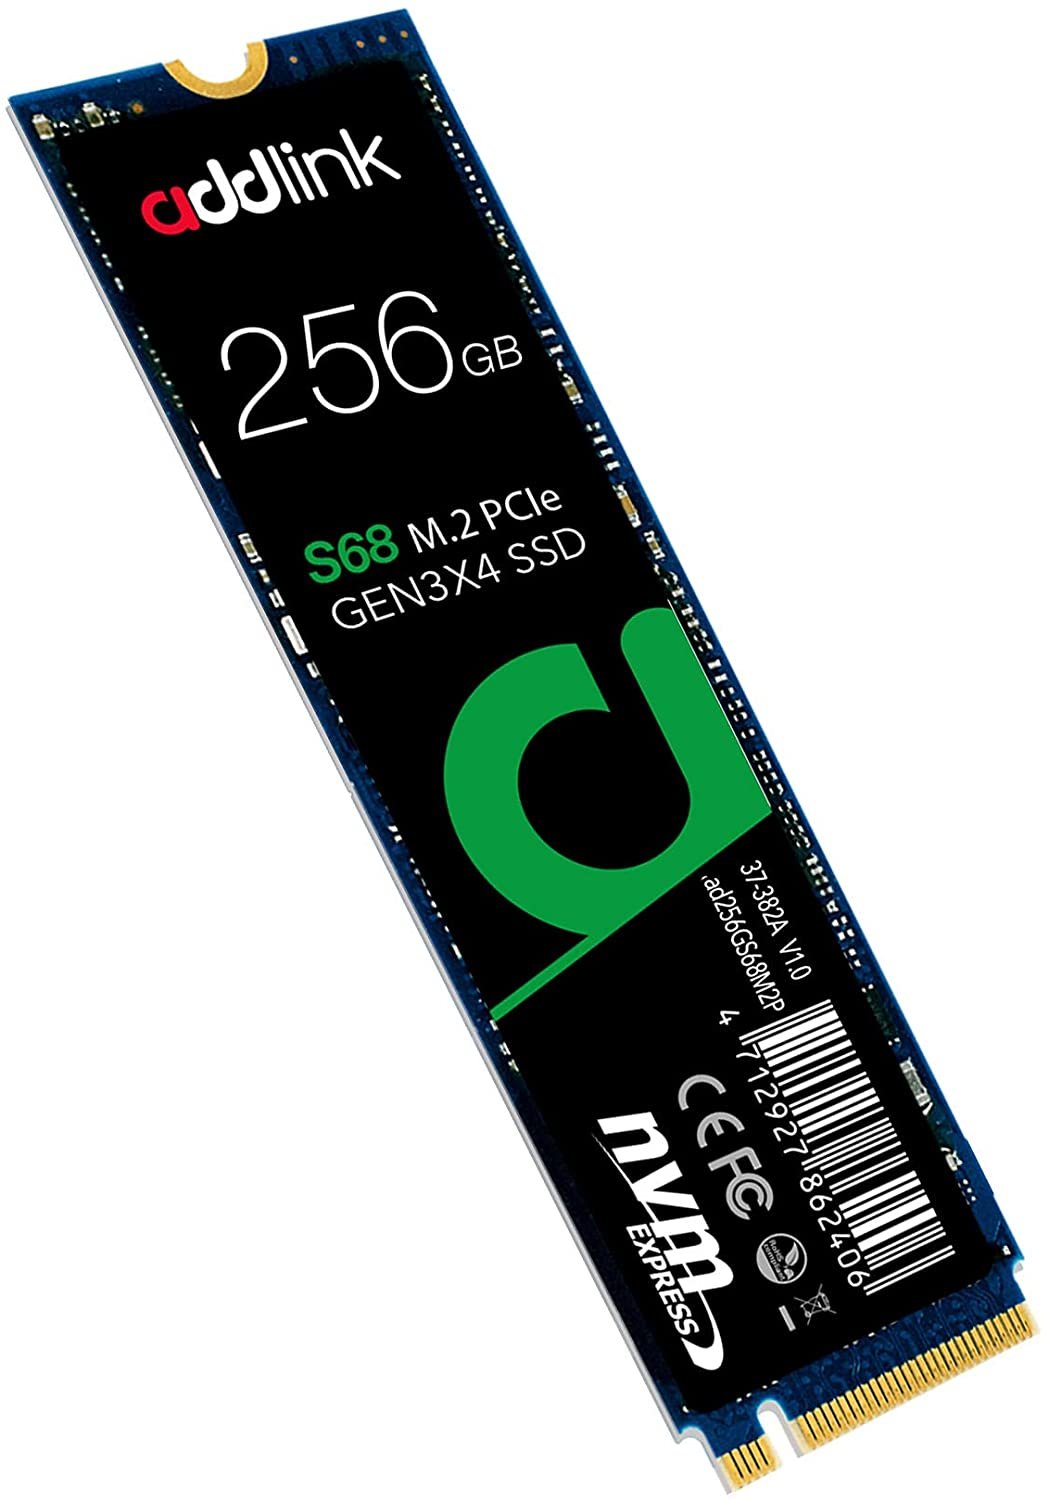 SSD addlink M.2 256GB S68 up to 2000 MB/s NVMe PCIe Gen3x4